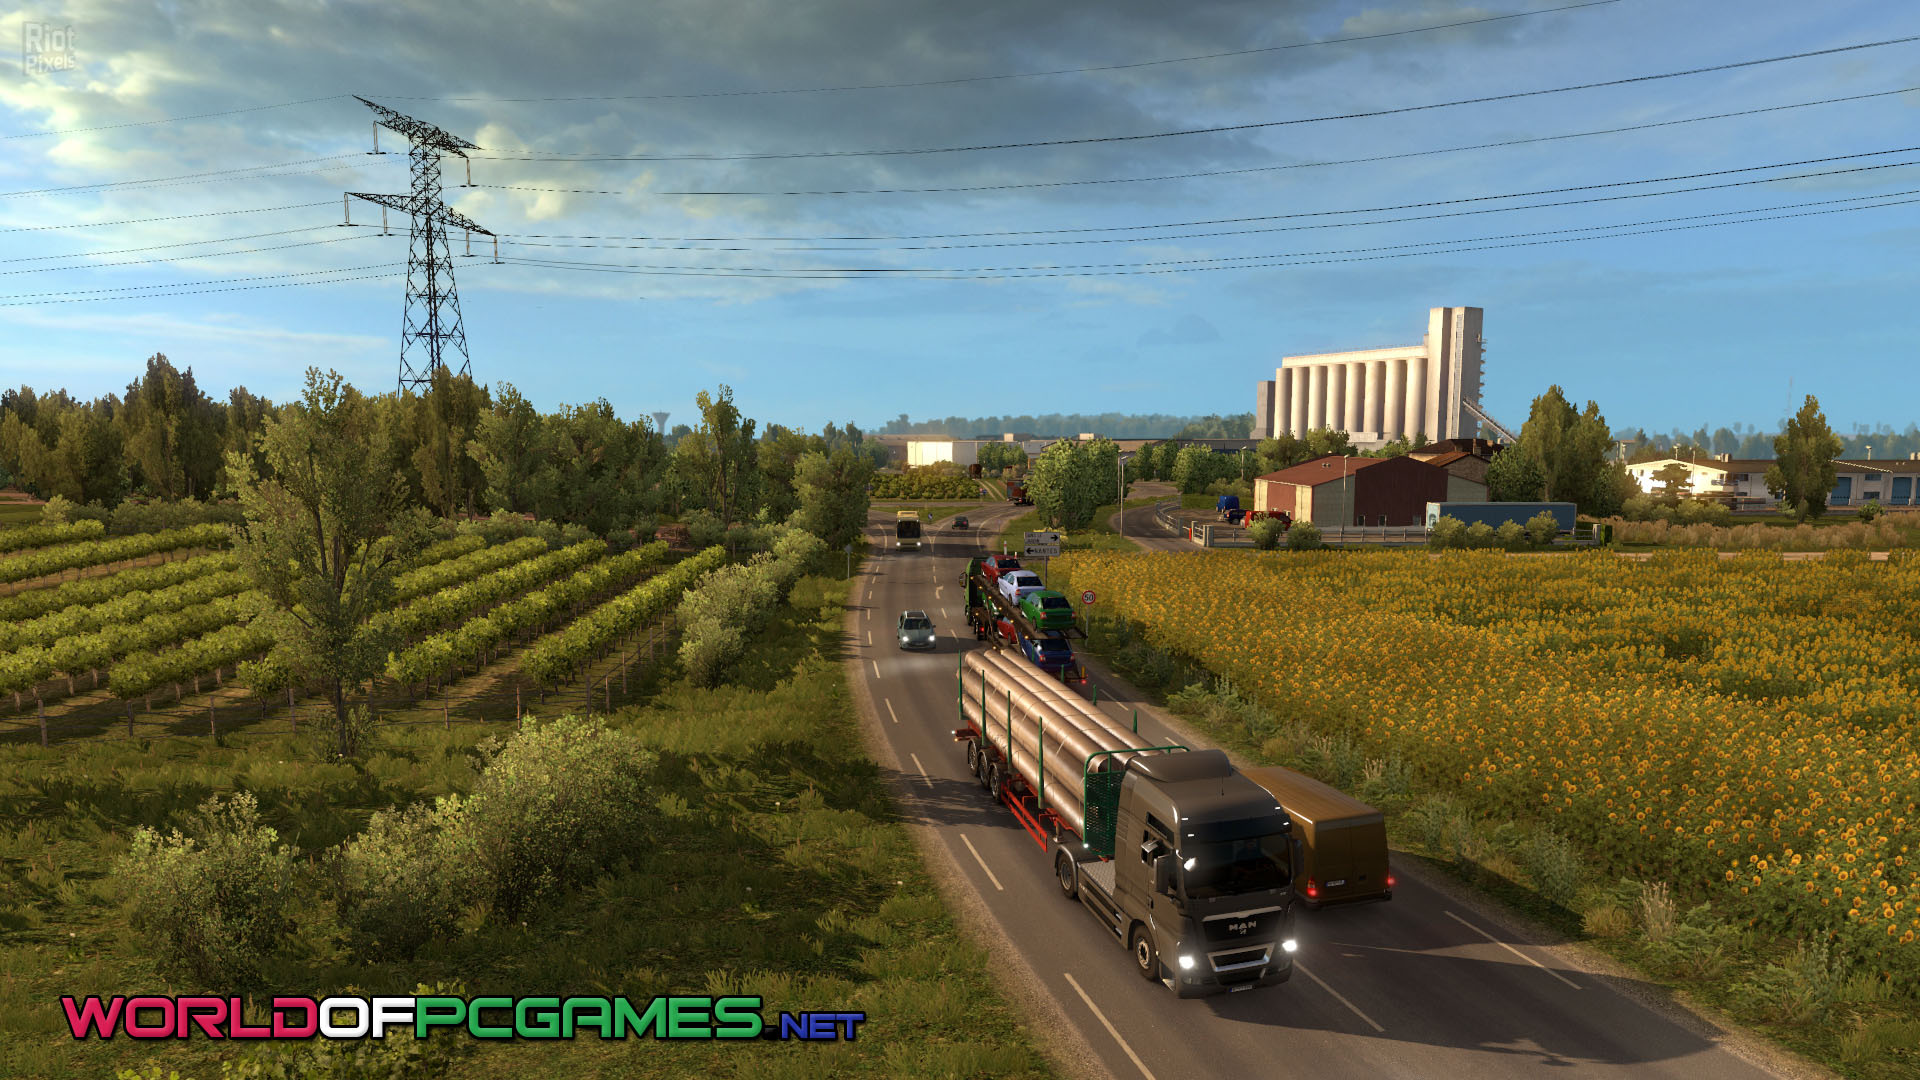 Euro Truck Simulator 2 PS4 Version Full Game Free Download - The Gamer HQ -  The Real Gaming Headquarters